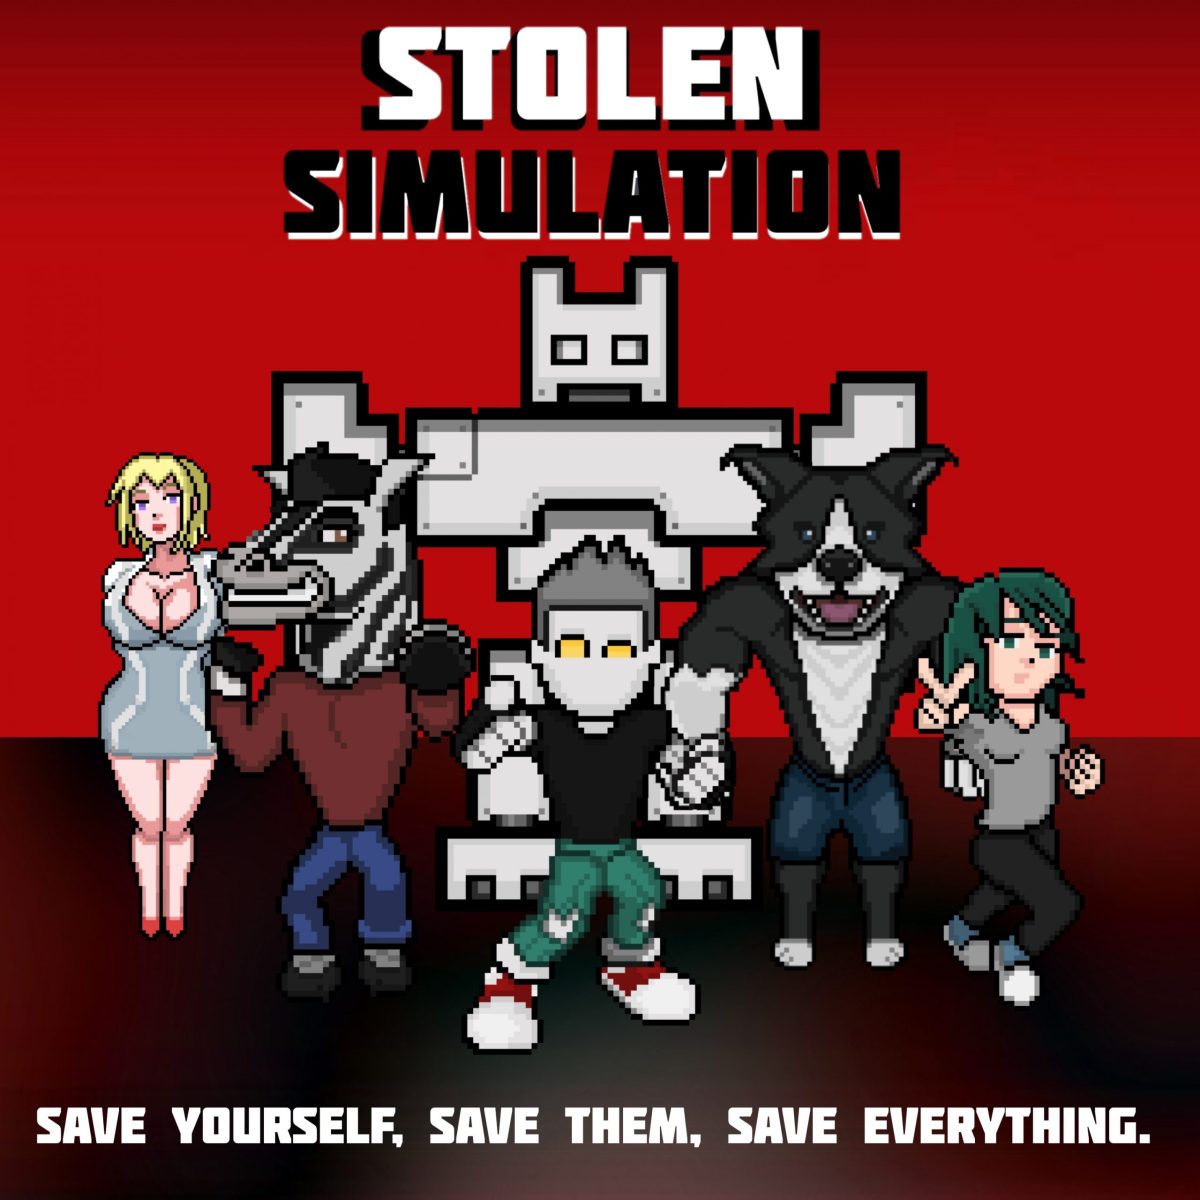 Mystery meets friendship in a Stolen Simulation